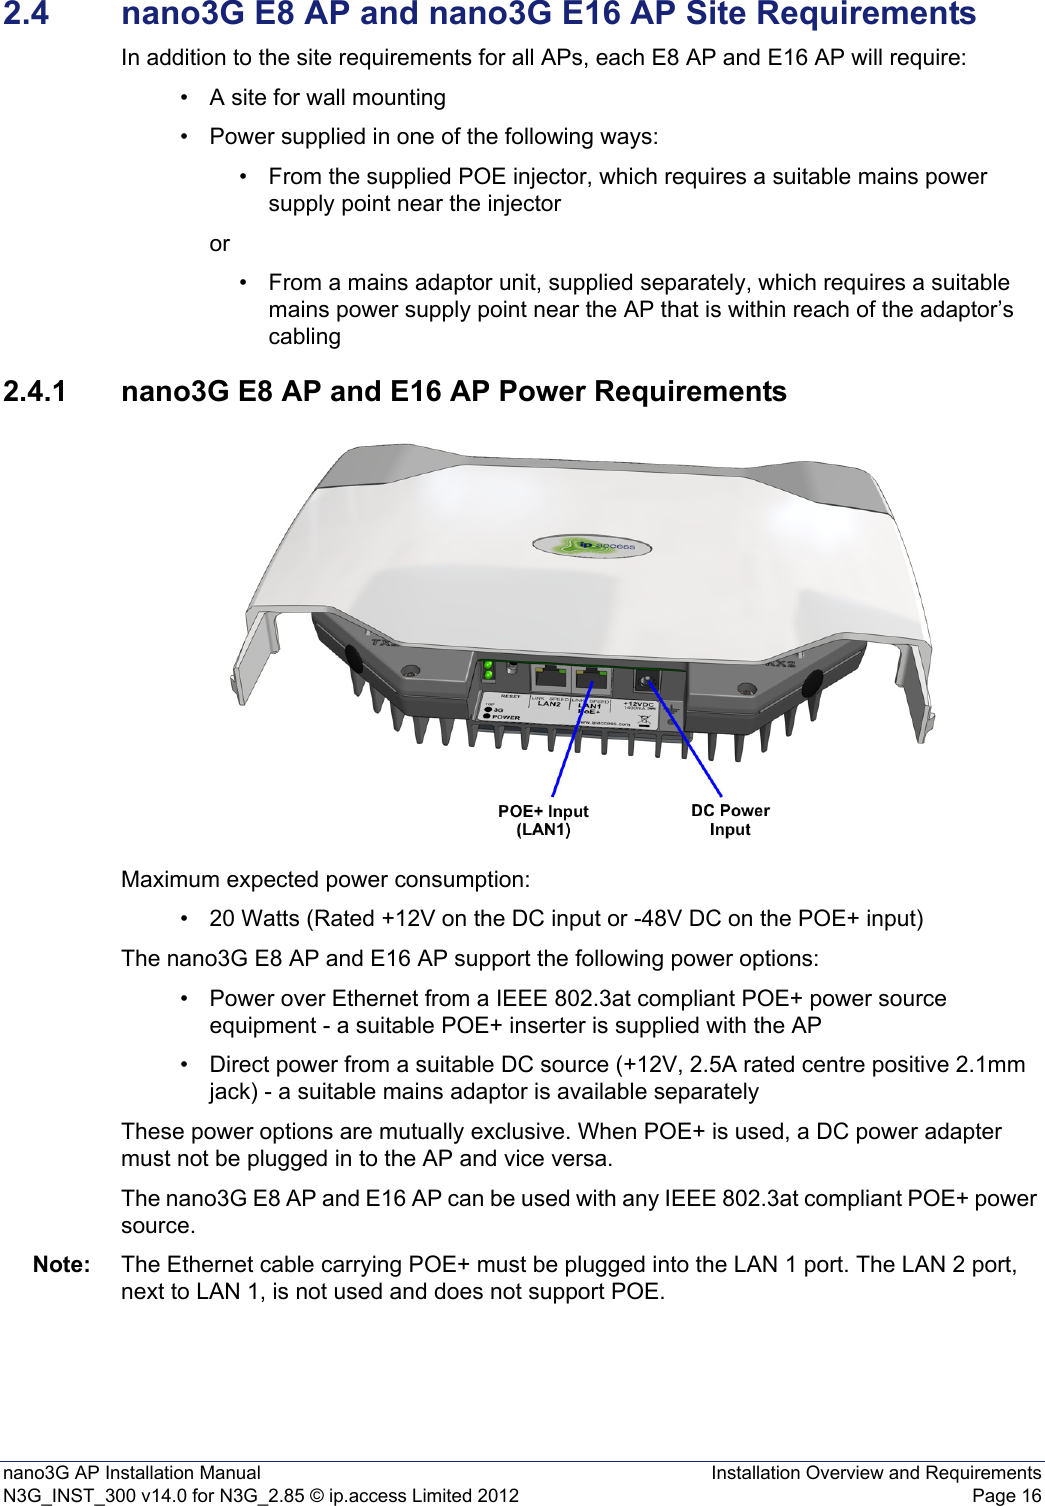 nano3G AP Installation Manual Installation Overview and RequirementsN3G_INST_300 v14.0 for N3G_2.85 © ip.access Limited 2012 Page 162.4 nano3G E8 AP and nano3G E16 AP Site RequirementsIn addition to the site requirements for all APs, each E8 AP and E16 AP will require:• A site for wall mounting• Power supplied in one of the following ways:• From the supplied POE injector, which requires a suitable mains power supply point near the injector or• From a mains adaptor unit, supplied separately, which requires a suitable mains power supply point near the AP that is within reach of the adaptor’s cabling2.4.1 nano3G E8 AP and E16 AP Power RequirementsMaximum expected power consumption:• 20 Watts (Rated +12V on the DC input or -48V DC on the POE+ input)The nano3G E8 AP and E16 AP support the following power options:• Power over Ethernet from a IEEE 802.3at compliant POE+ power source equipment - a suitable POE+ inserter is supplied with the AP• Direct power from a suitable DC source (+12V, 2.5A rated centre positive 2.1mm jack) - a suitable mains adaptor is available separatelyThese power options are mutually exclusive. When POE+ is used, a DC power adapter must not be plugged in to the AP and vice versa.The nano3G E8 AP and E16 AP can be used with any IEEE 802.3at compliant POE+ power source.Note: The Ethernet cable carrying POE+ must be plugged into the LAN 1 port. The LAN 2 port, next to LAN 1, is not used and does not support POE.